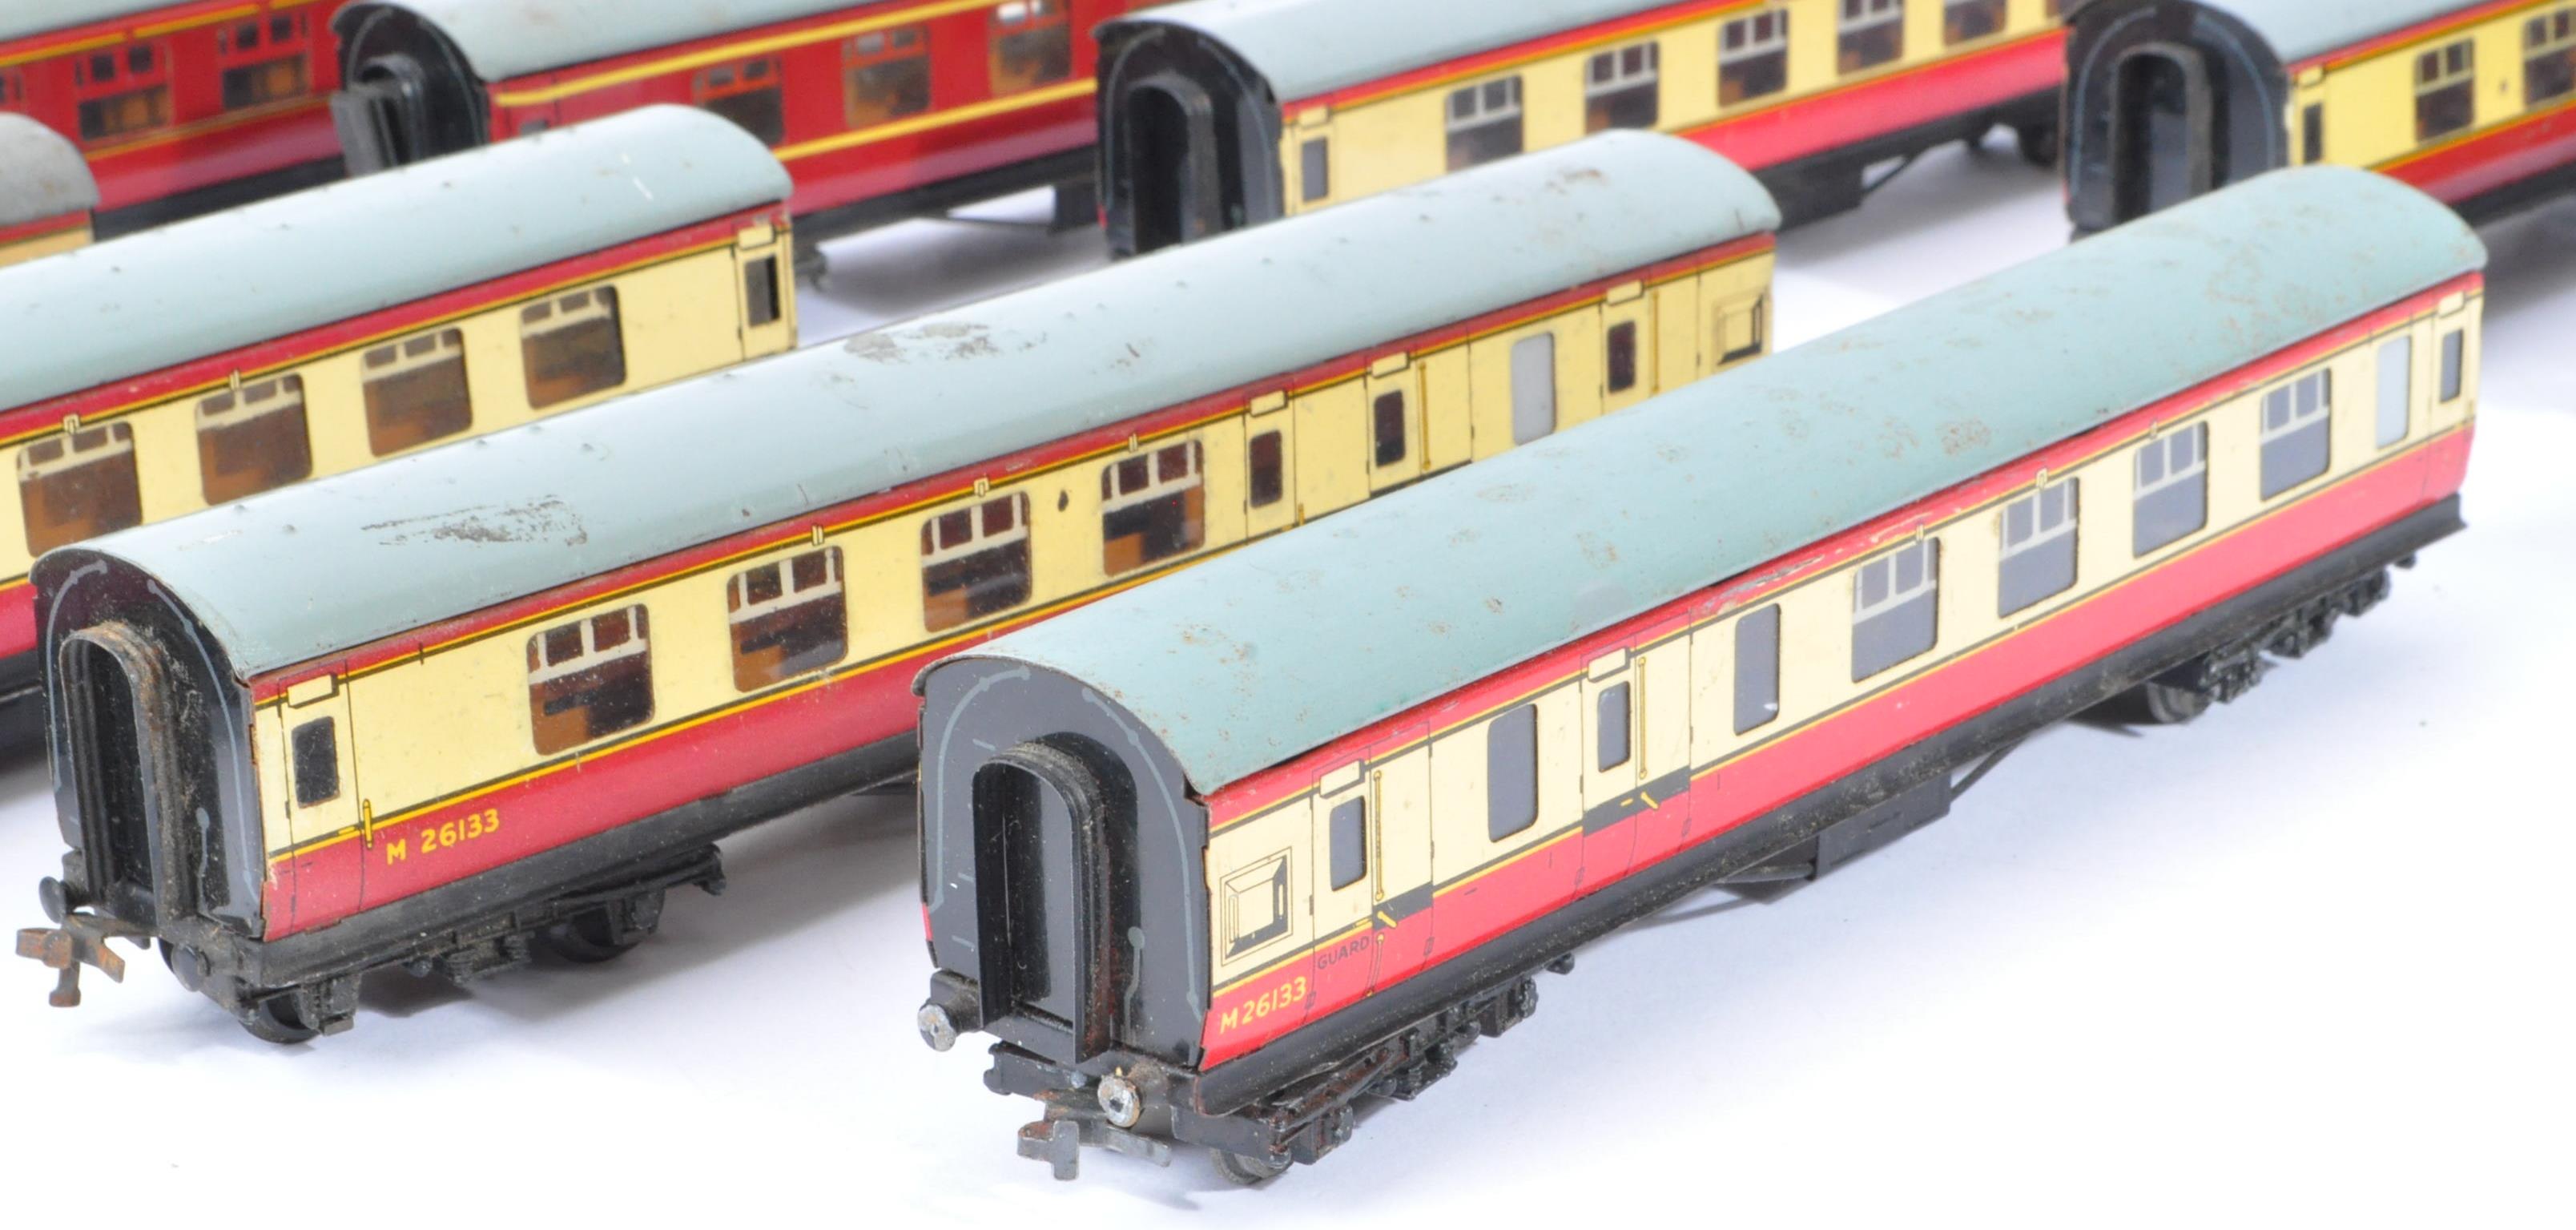 COLLECTION OF HORNBY DUBLO MODEL RAILWAY TRAINSET CARRIAGES - Image 5 of 5